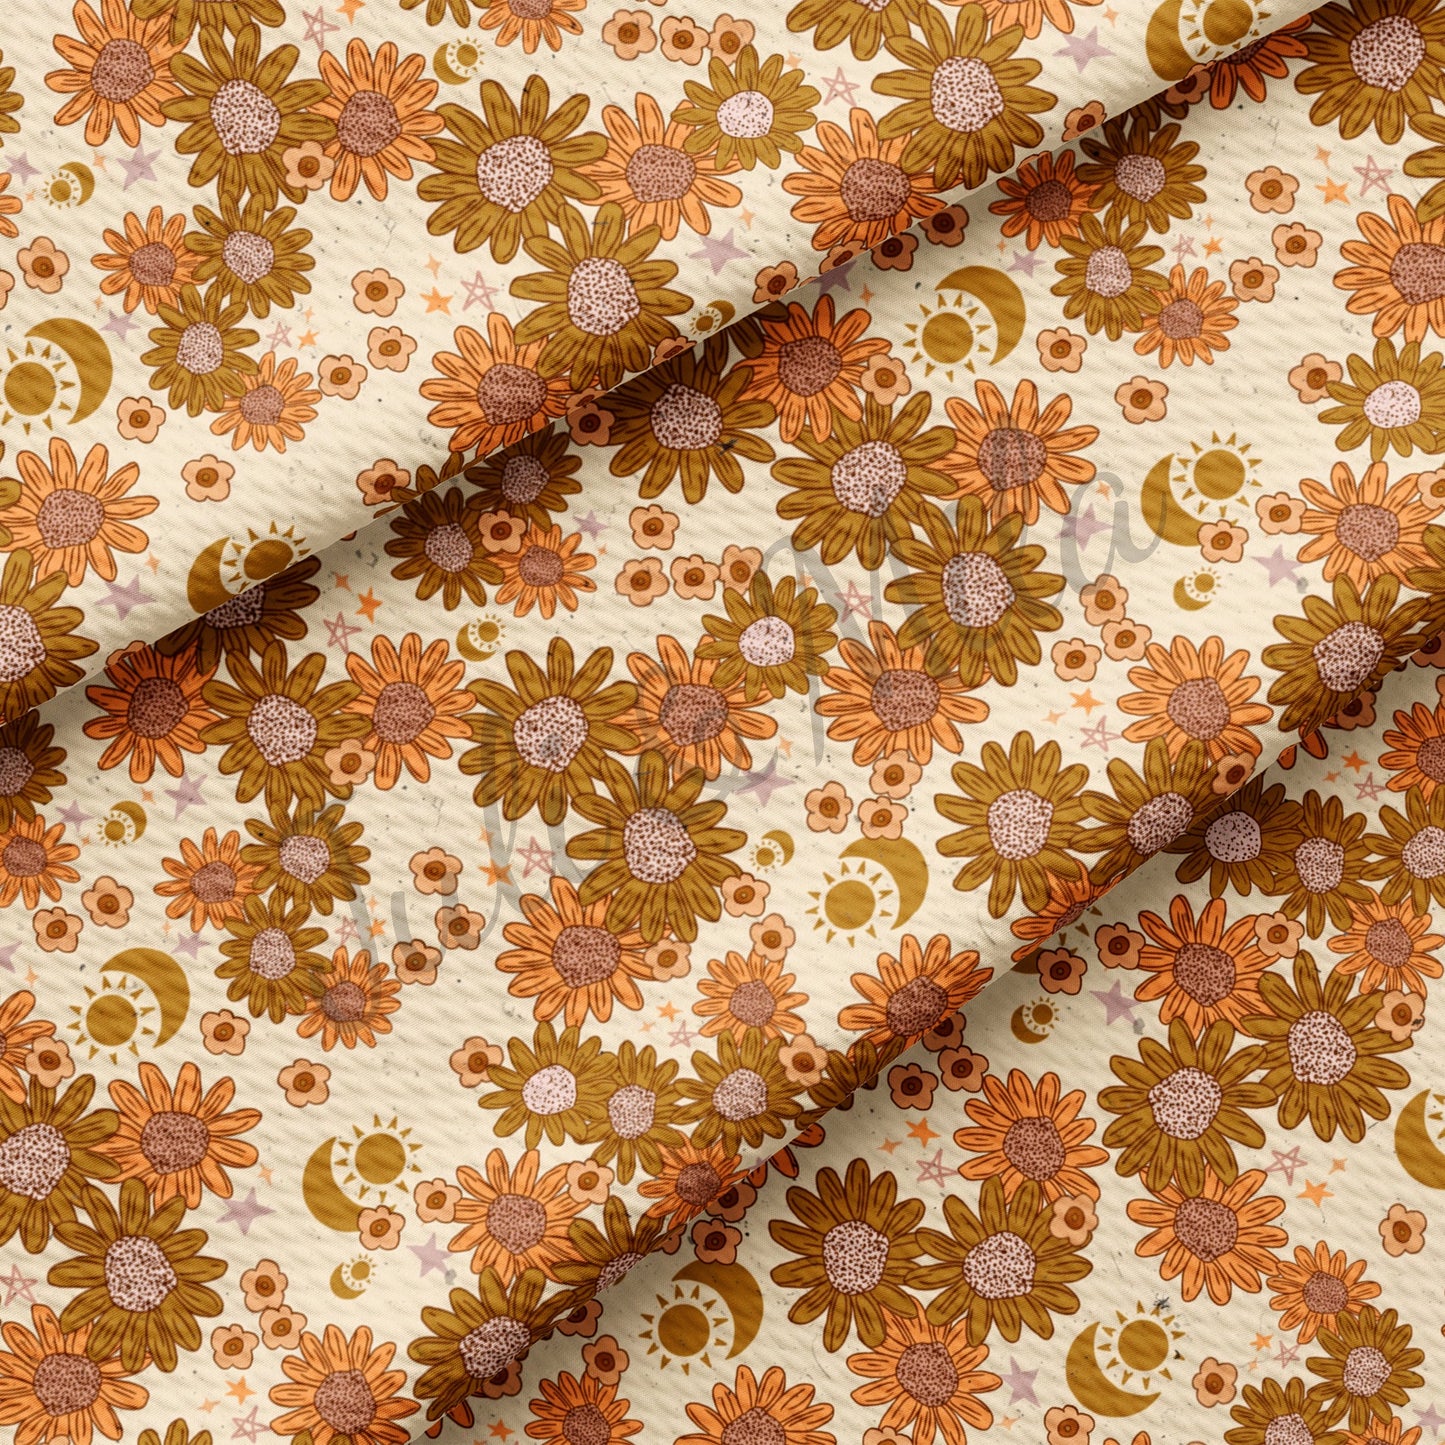 Bullet Textured Fabric Floral103